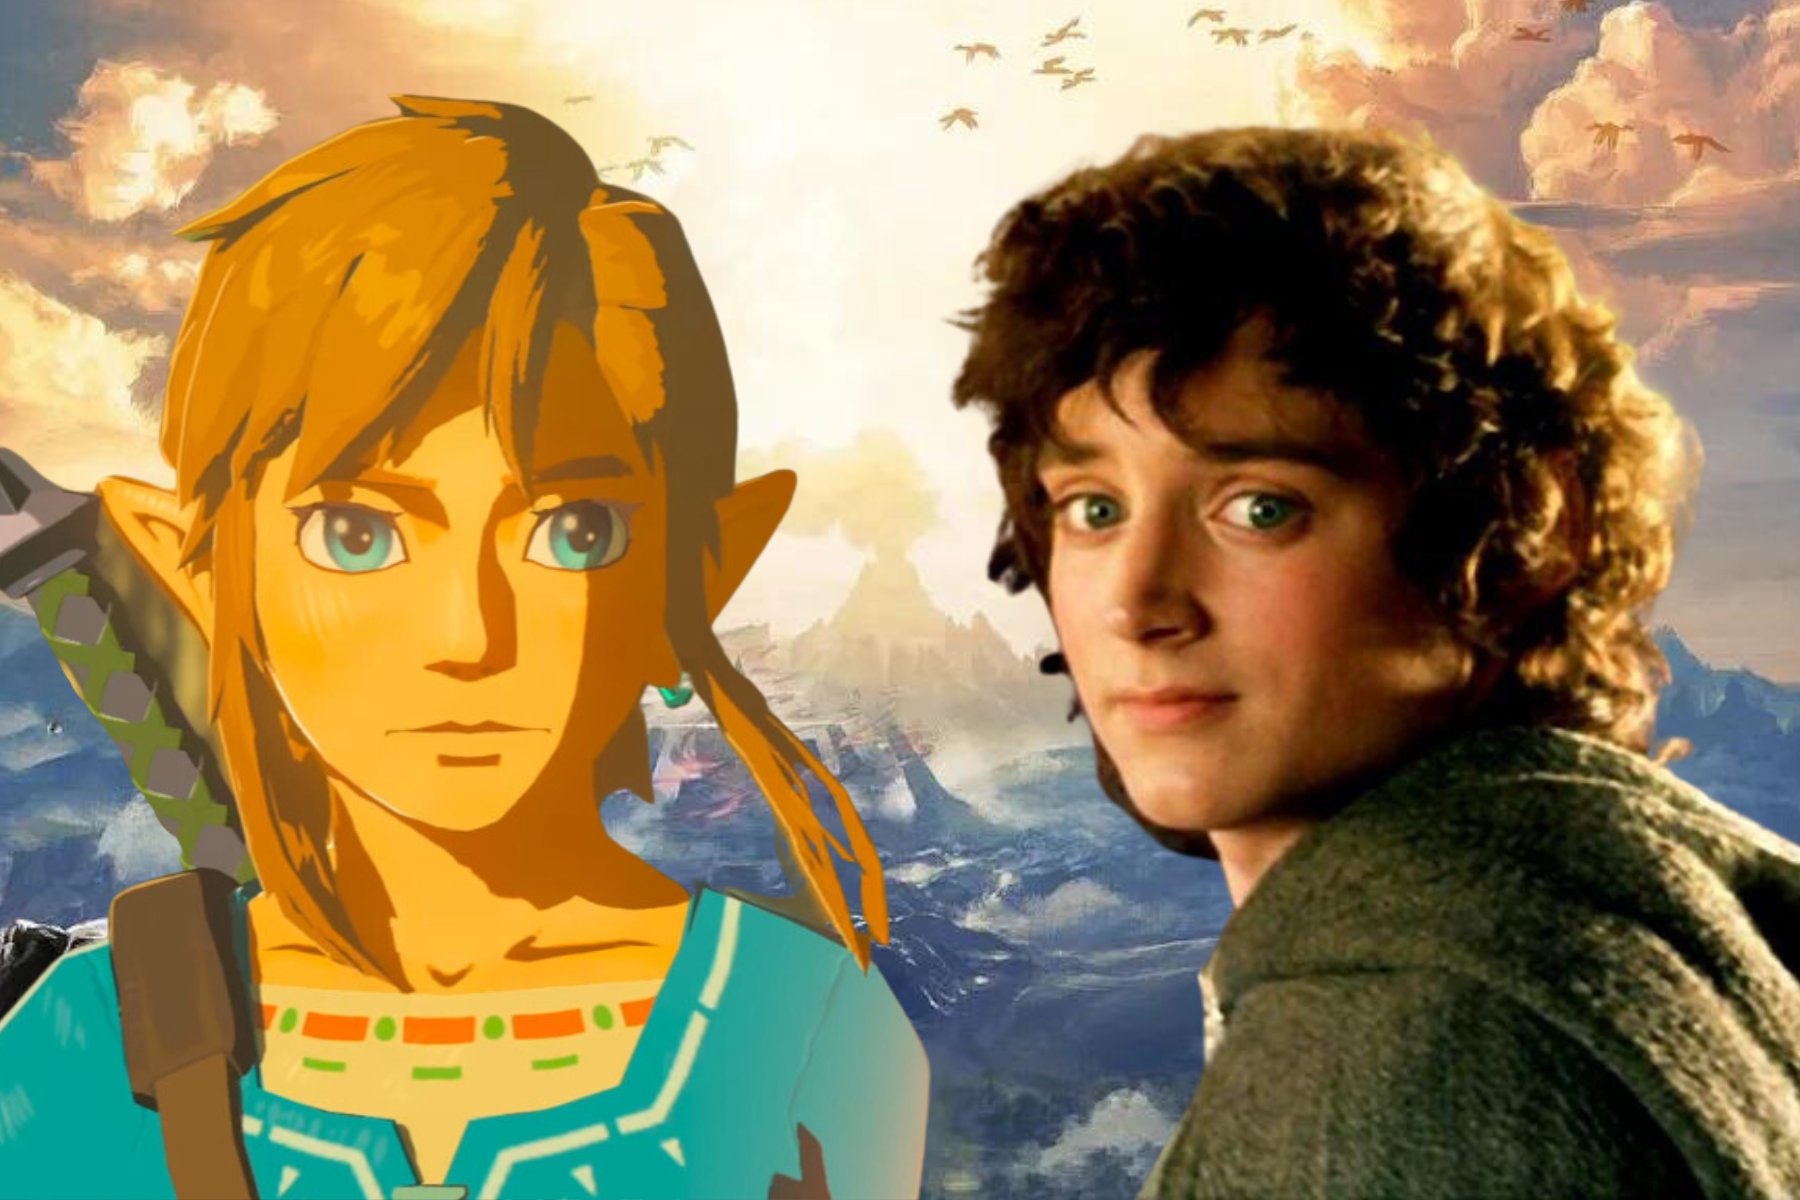 This or That Quiz: "The Legend of Zelda" vs "Lord of the Rings"